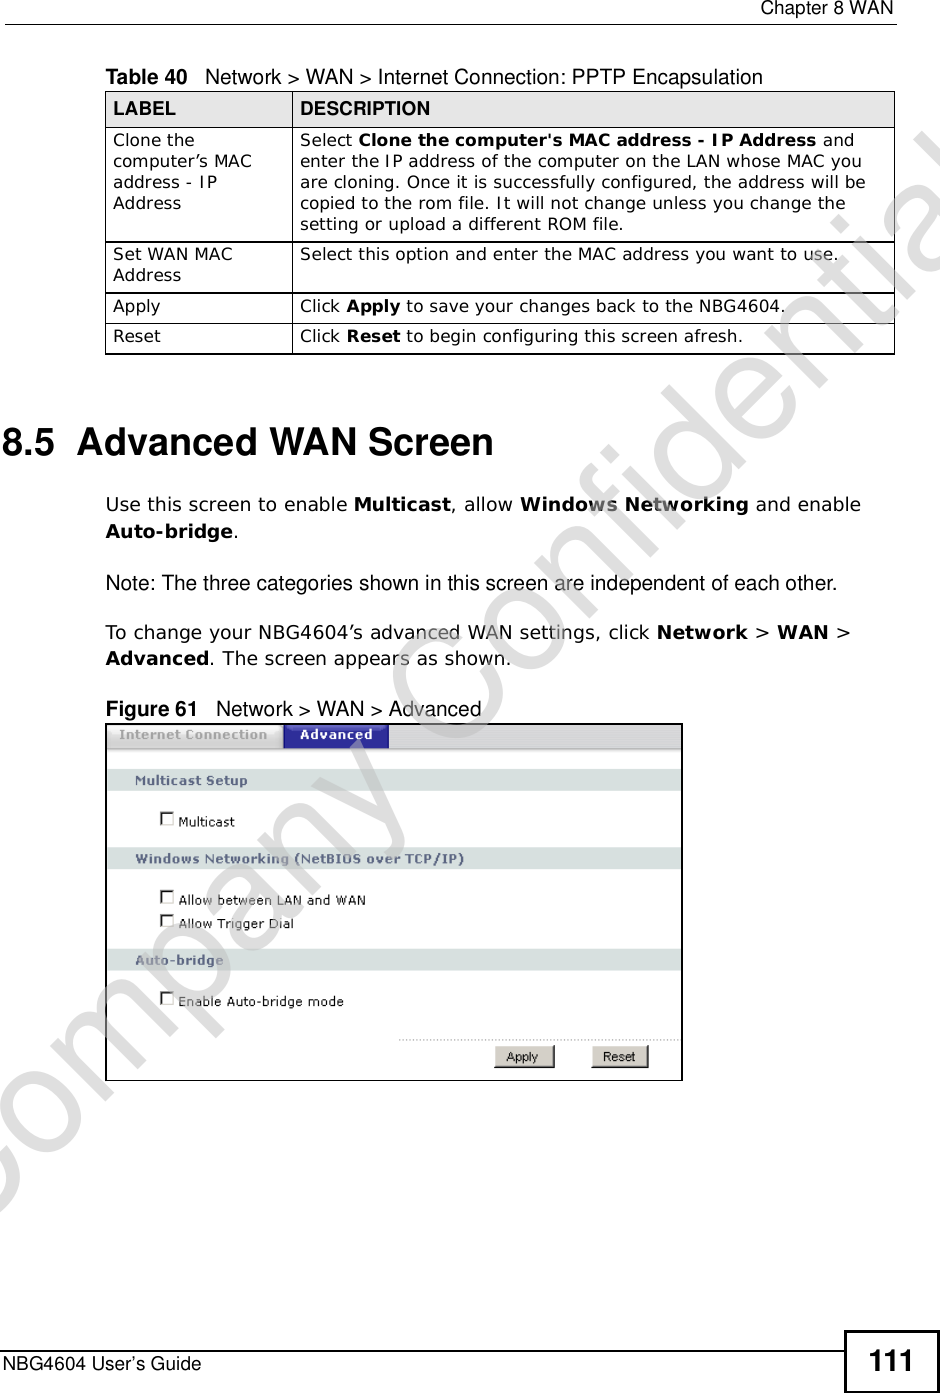  Chapter 8WANNBG4604 User’s Guide 1118.5  Advanced WAN ScreenUse this screen to enable Multicast, allow Windows Networking and enable Auto-bridge.Note: The three categories shown in this screen are independent of each other.  To change your NBG4604’s advanced WAN settings, click Network &gt; WAN &gt; Advanced. The screen appears as shown.Figure 61   Network &gt; WAN &gt; Advanced Clone the computer’s MAC address - IP AddressSelect Clone the computer&apos;s MAC address - IP Address and enter the IP address of the computer on the LAN whose MAC you are cloning. Once it is successfully configured, the address will be copied to the rom file. It will not change unless you change the setting or upload a different ROM file. Set WAN MAC Address Select this option and enter the MAC address you want to use.Apply Click Apply to save your changes back to the NBG4604.Reset Click Reset to begin configuring this screen afresh.Table 40   Network &gt; WAN &gt; Internet Connection: PPTP EncapsulationLABEL DESCRIPTIONCompany Confidential